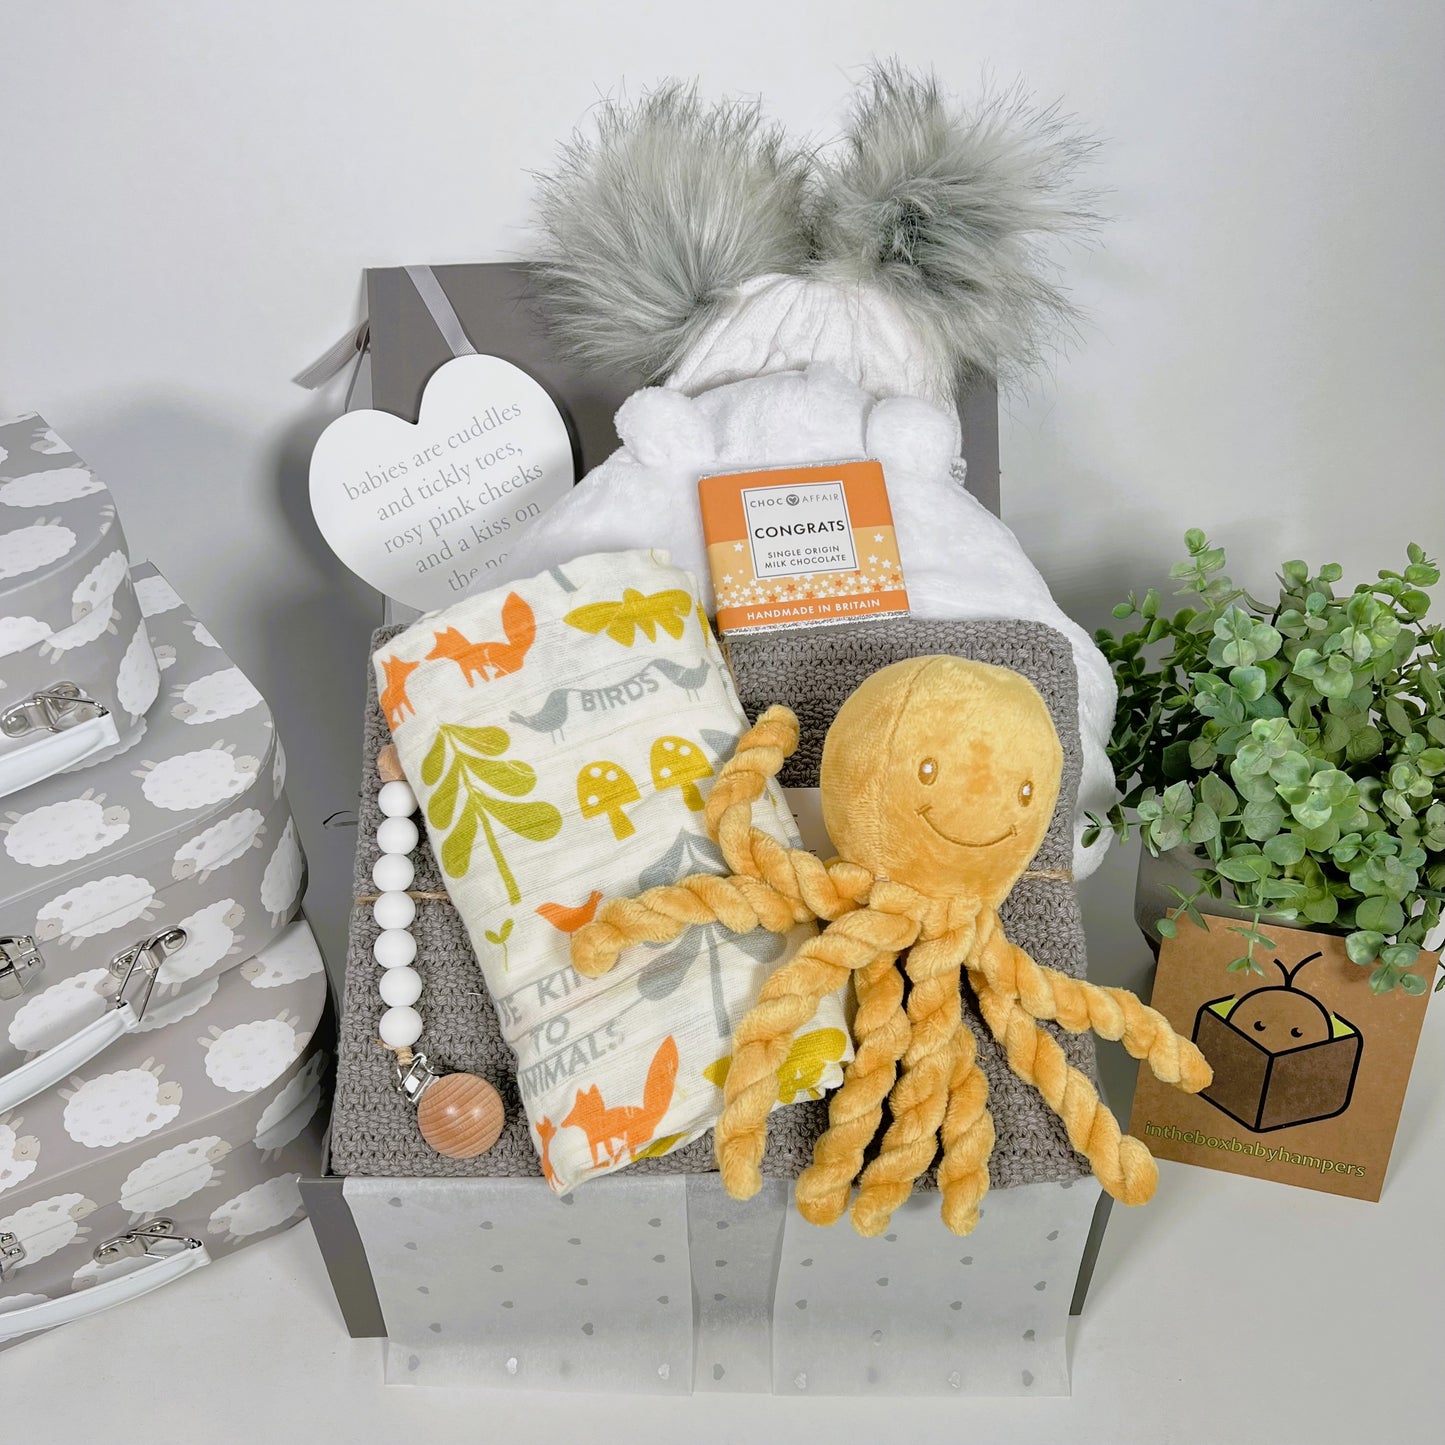 Luxury new baby hamper gift for the new parents containing a luxury cotton cellular baby blanket, a Pui Pui octopus soft baby toy, a white baby dressing gown, large muslin square, baby pompom hat, abar of chocolate , a nursery plaque and a dummy clip.